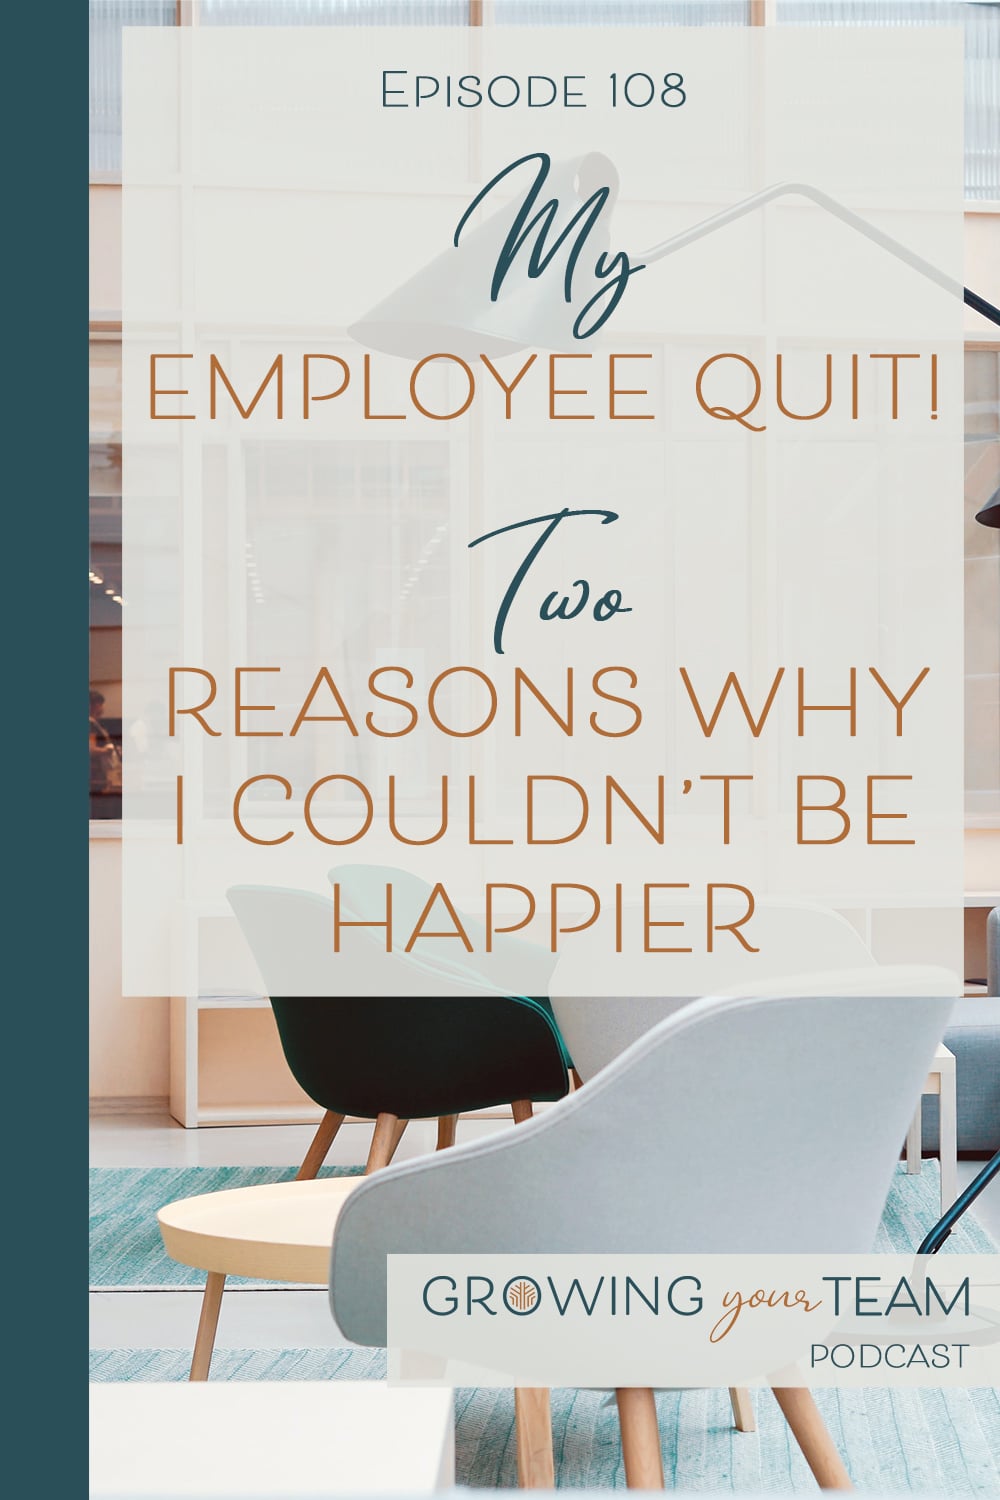 Employee Quit, Growing You Team Podcast, Jamie Van Cuyk, Small Business